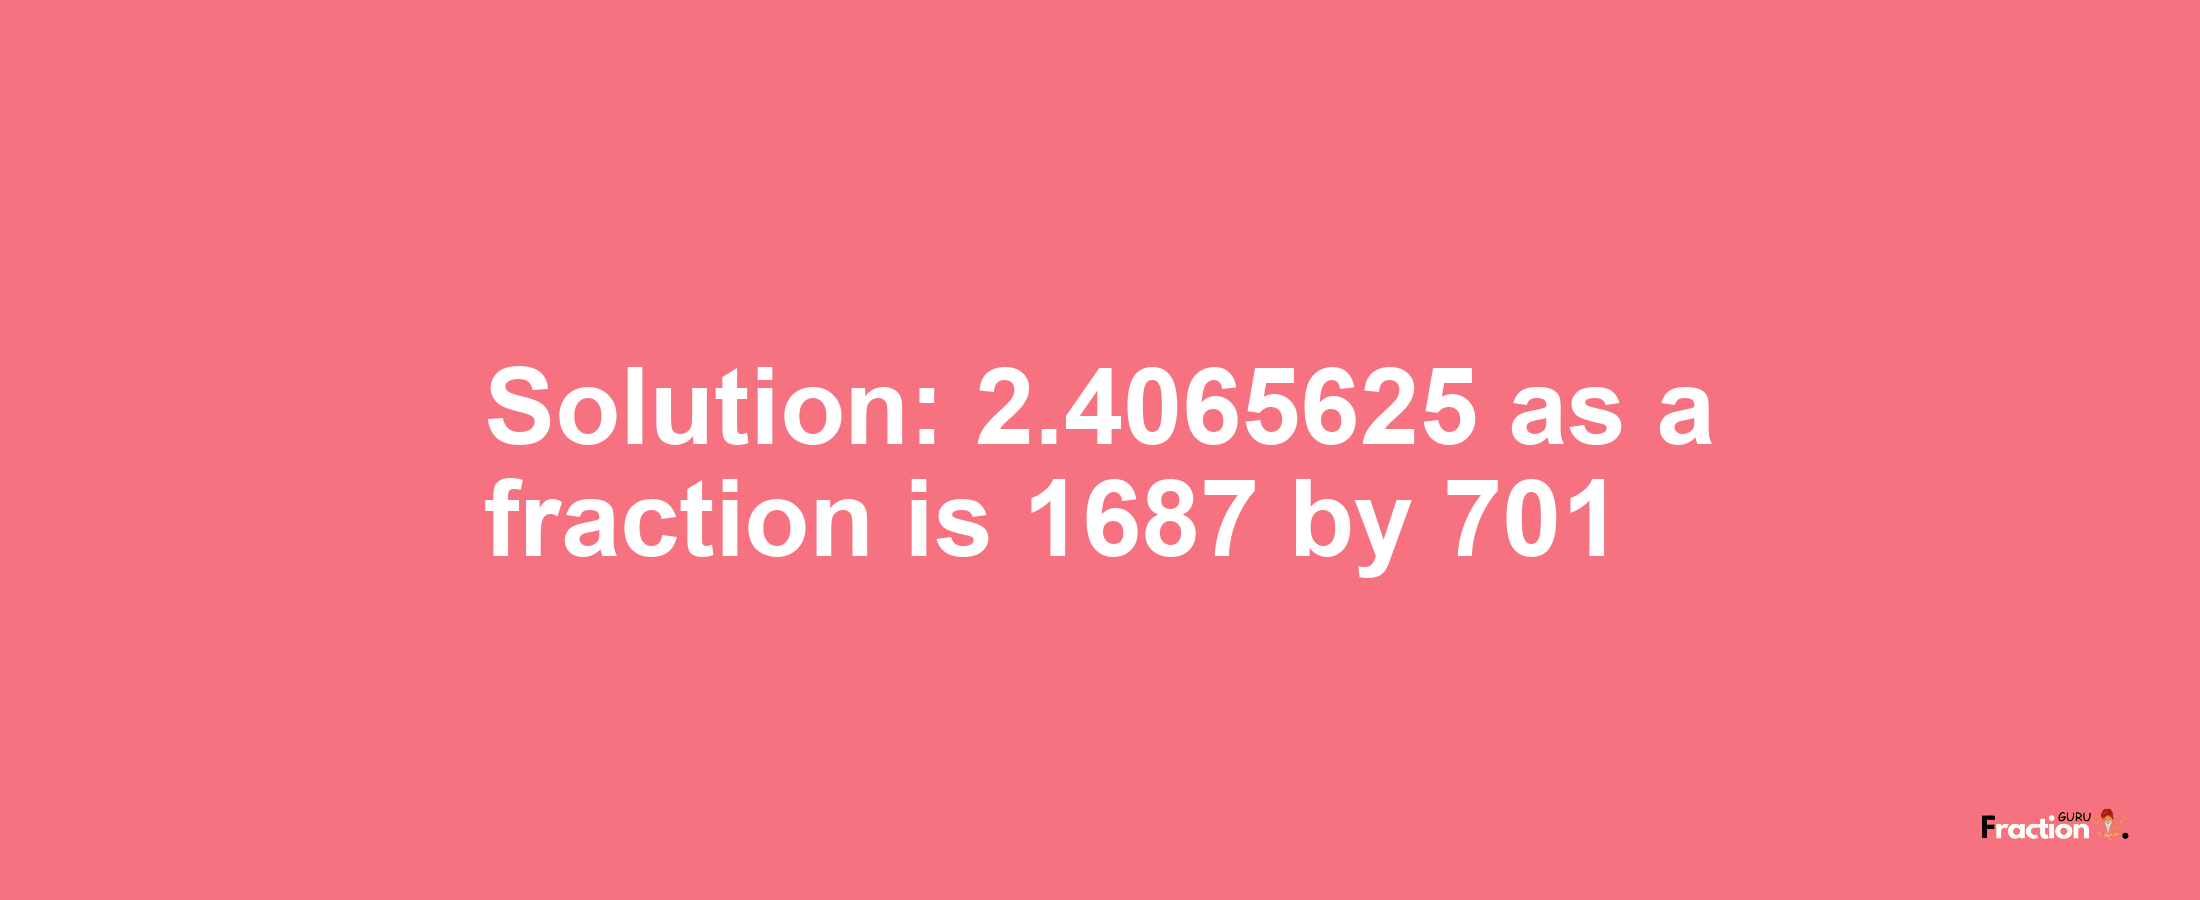 Solution:2.4065625 as a fraction is 1687/701